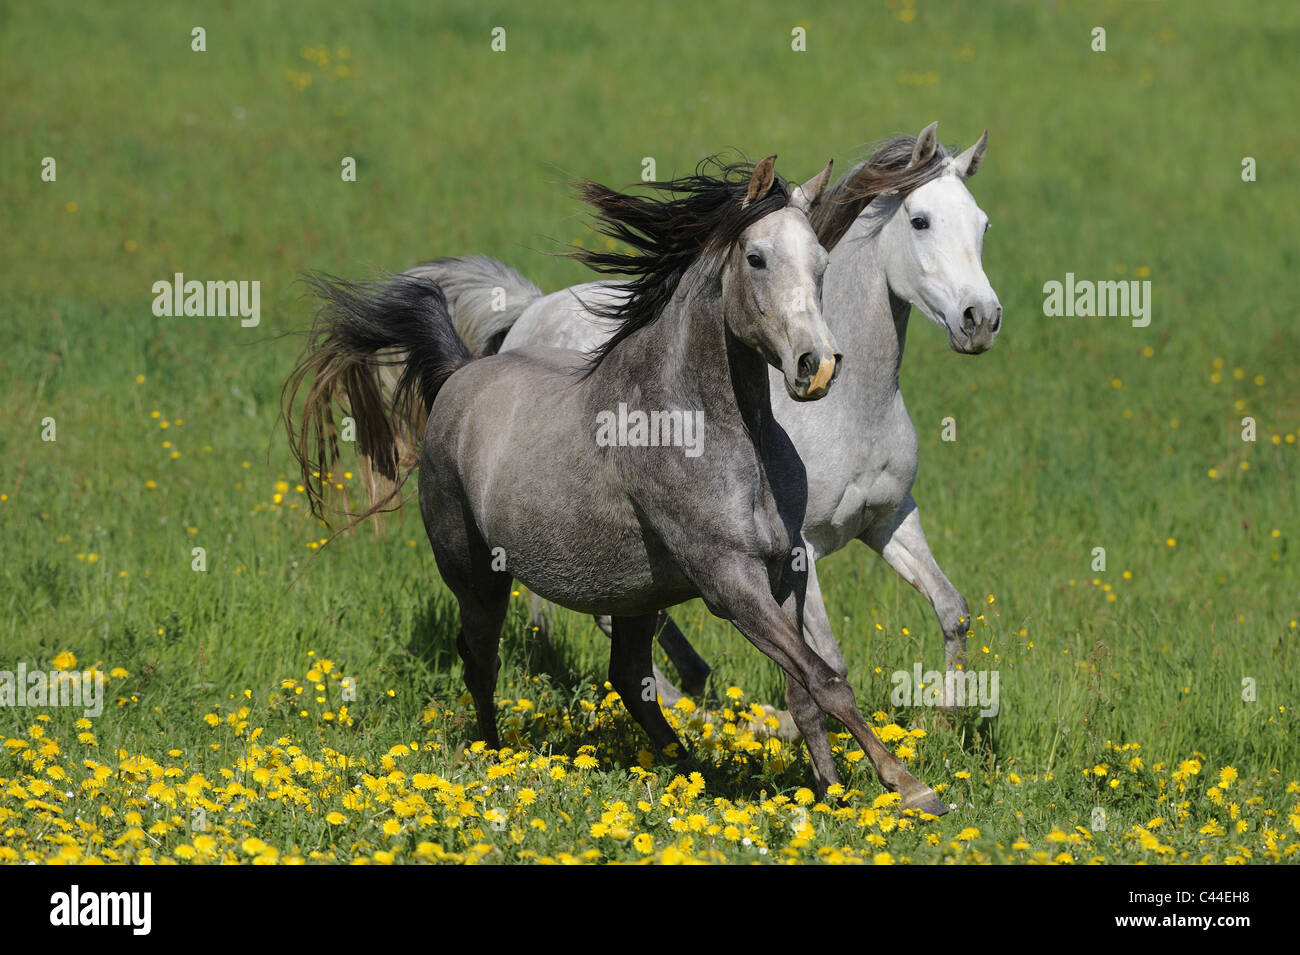 Purebred Arabian Horse (Equus ferus caballus). Pair of white mares galloping on a flowering meadow. Stock Photo